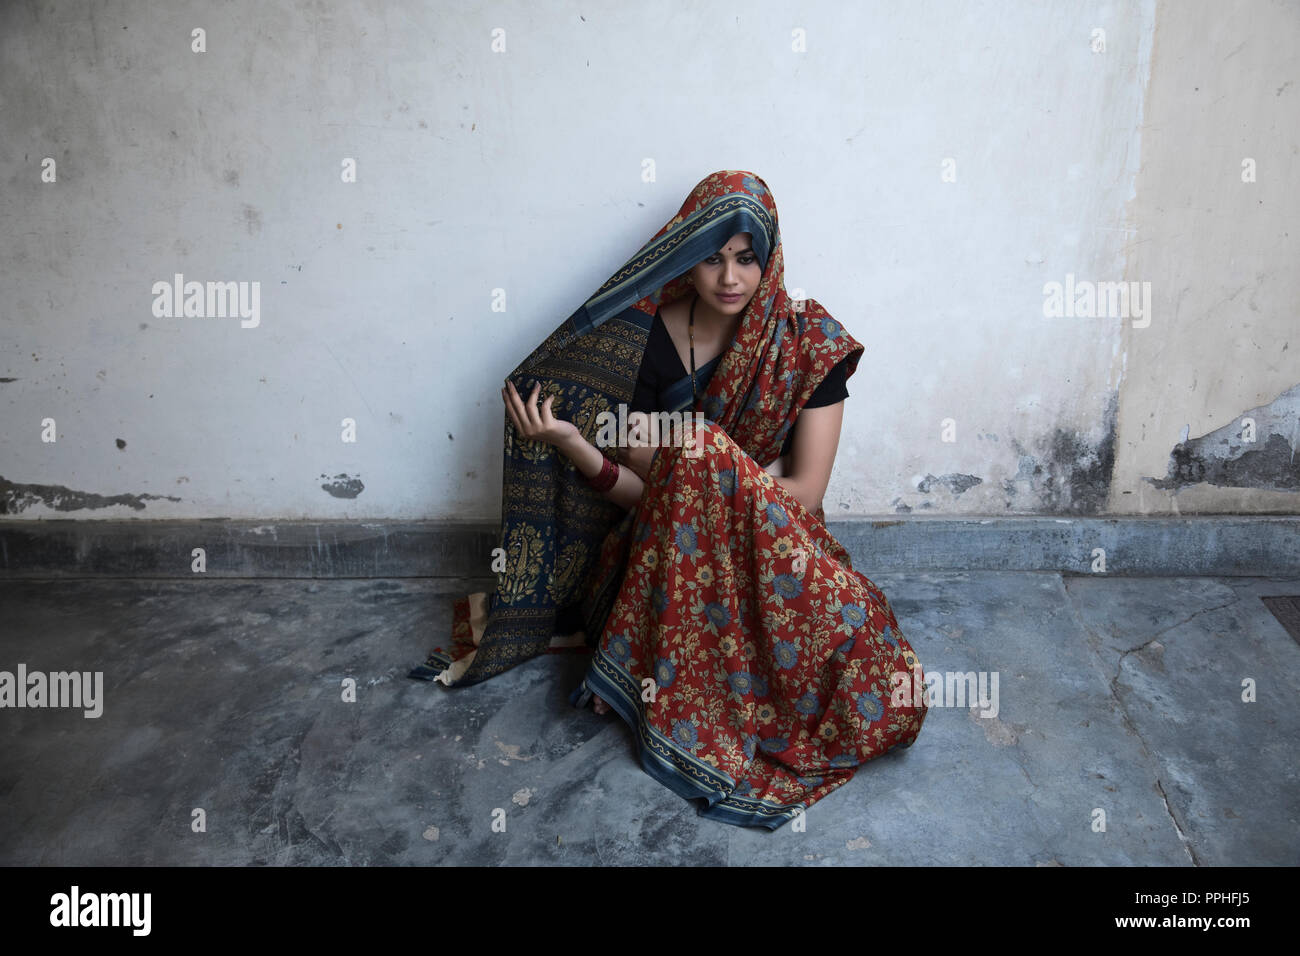 Beautiful woman sitting on the floor covering her head with saree looking down. Stock Photo